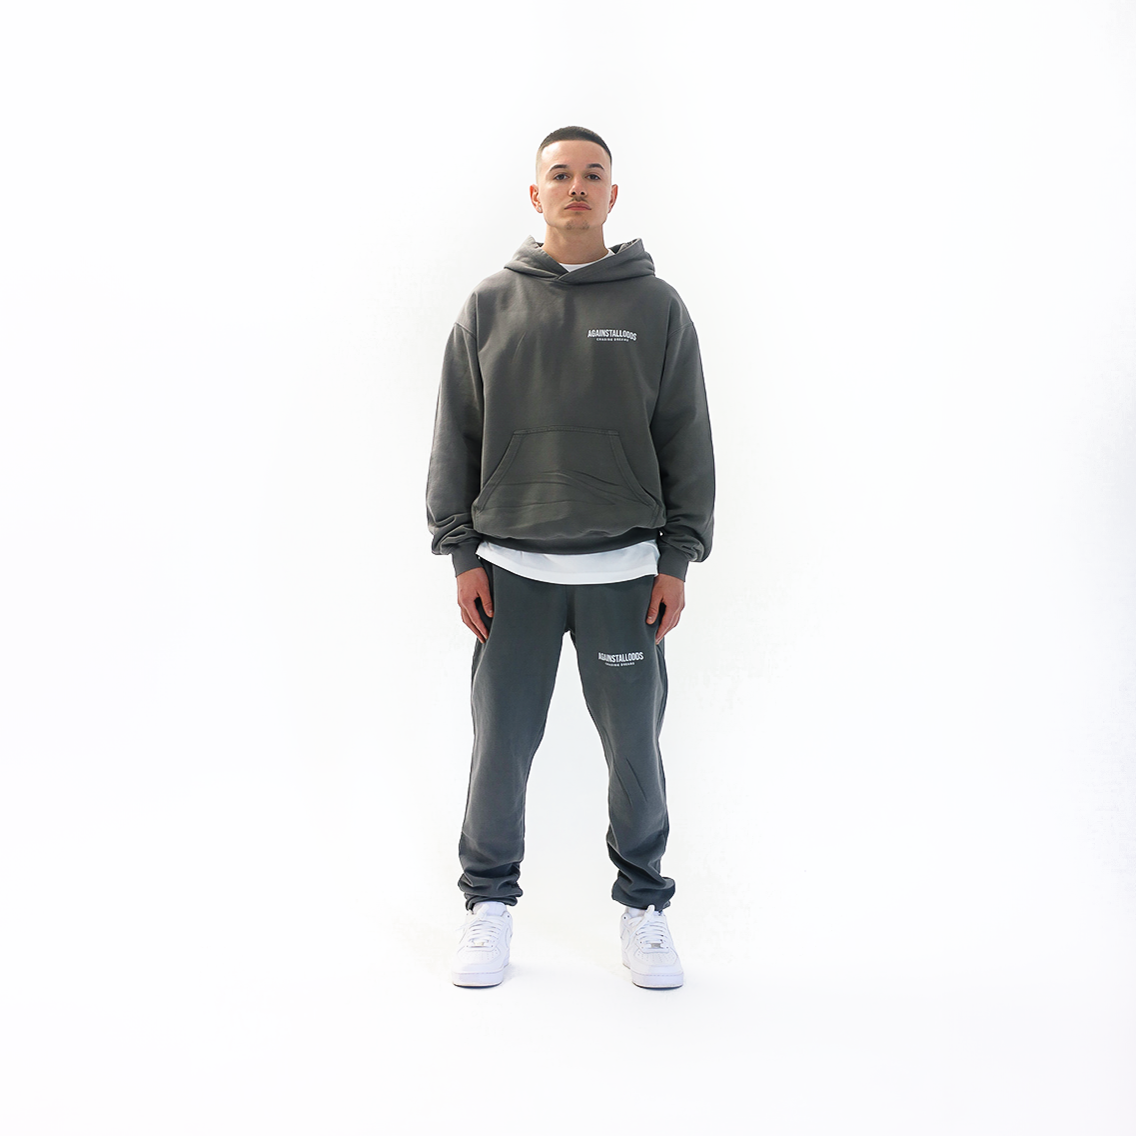 Dreamers French Terry Sweatpants - Graphite